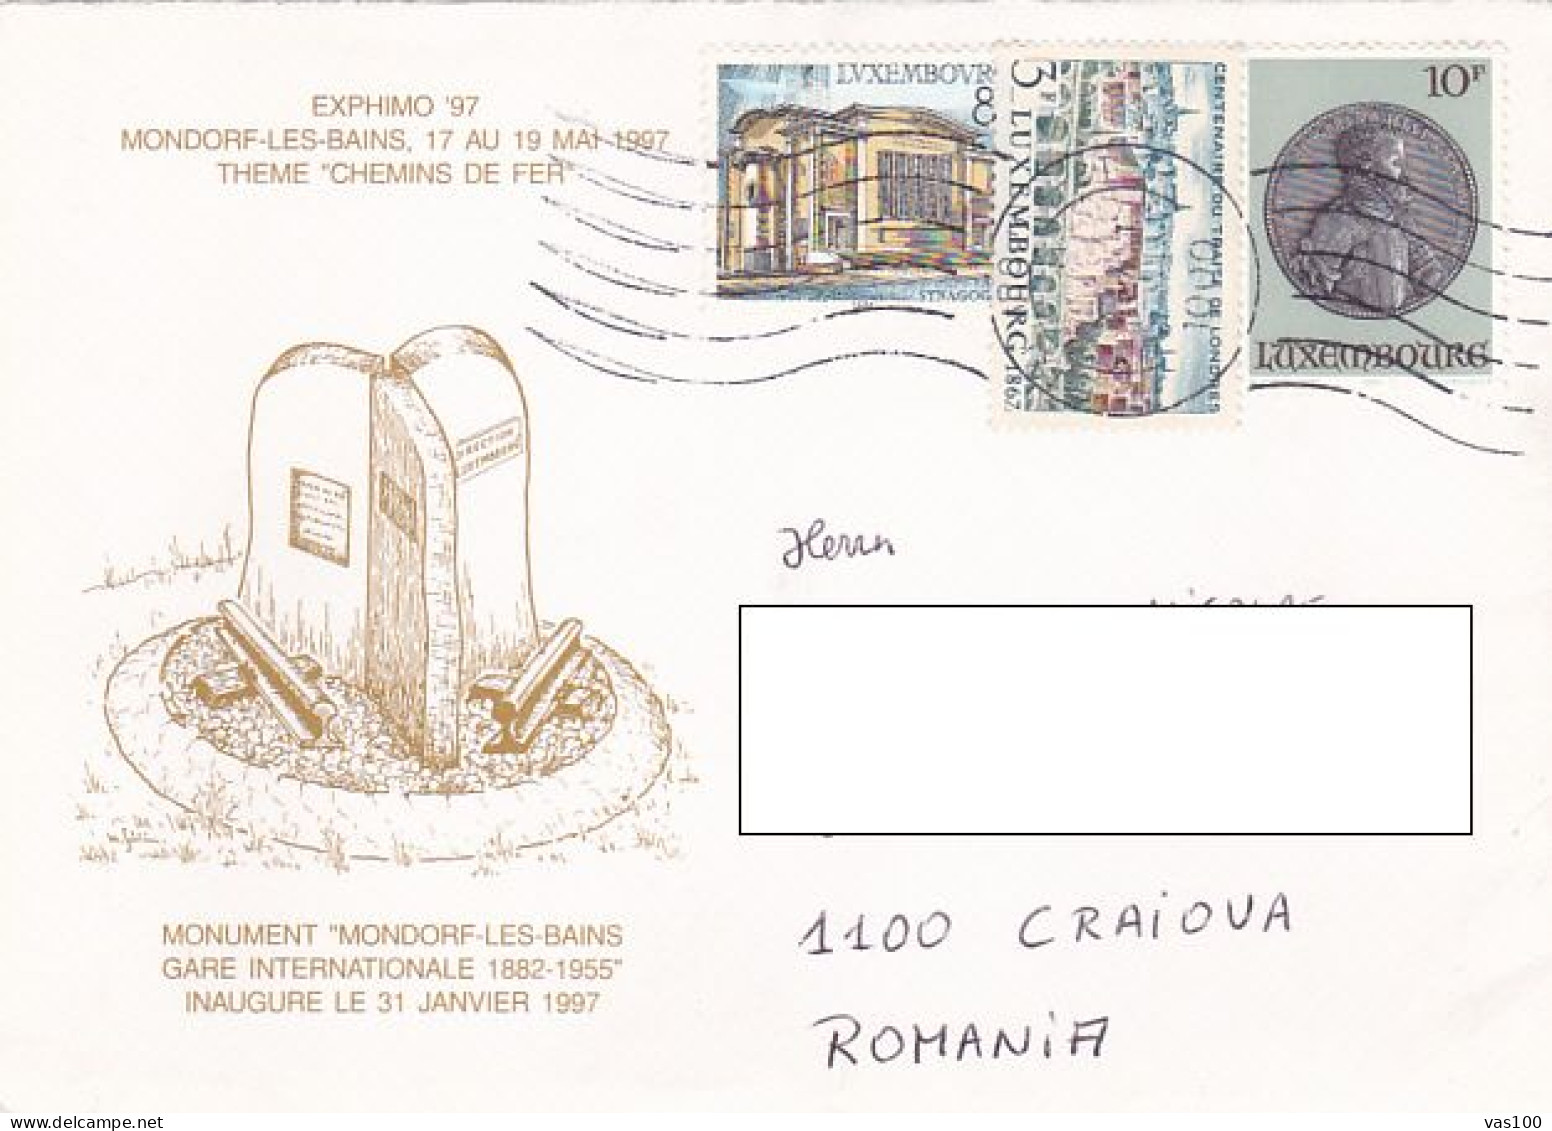 SYNAGOGUE, LONDON TREATY, KING PHILIP II OF SPAIN, STAMPS ON RAILWAYS MONUMENT SPECIAL COVER, 2001, LUXEMBOURG - Covers & Documents